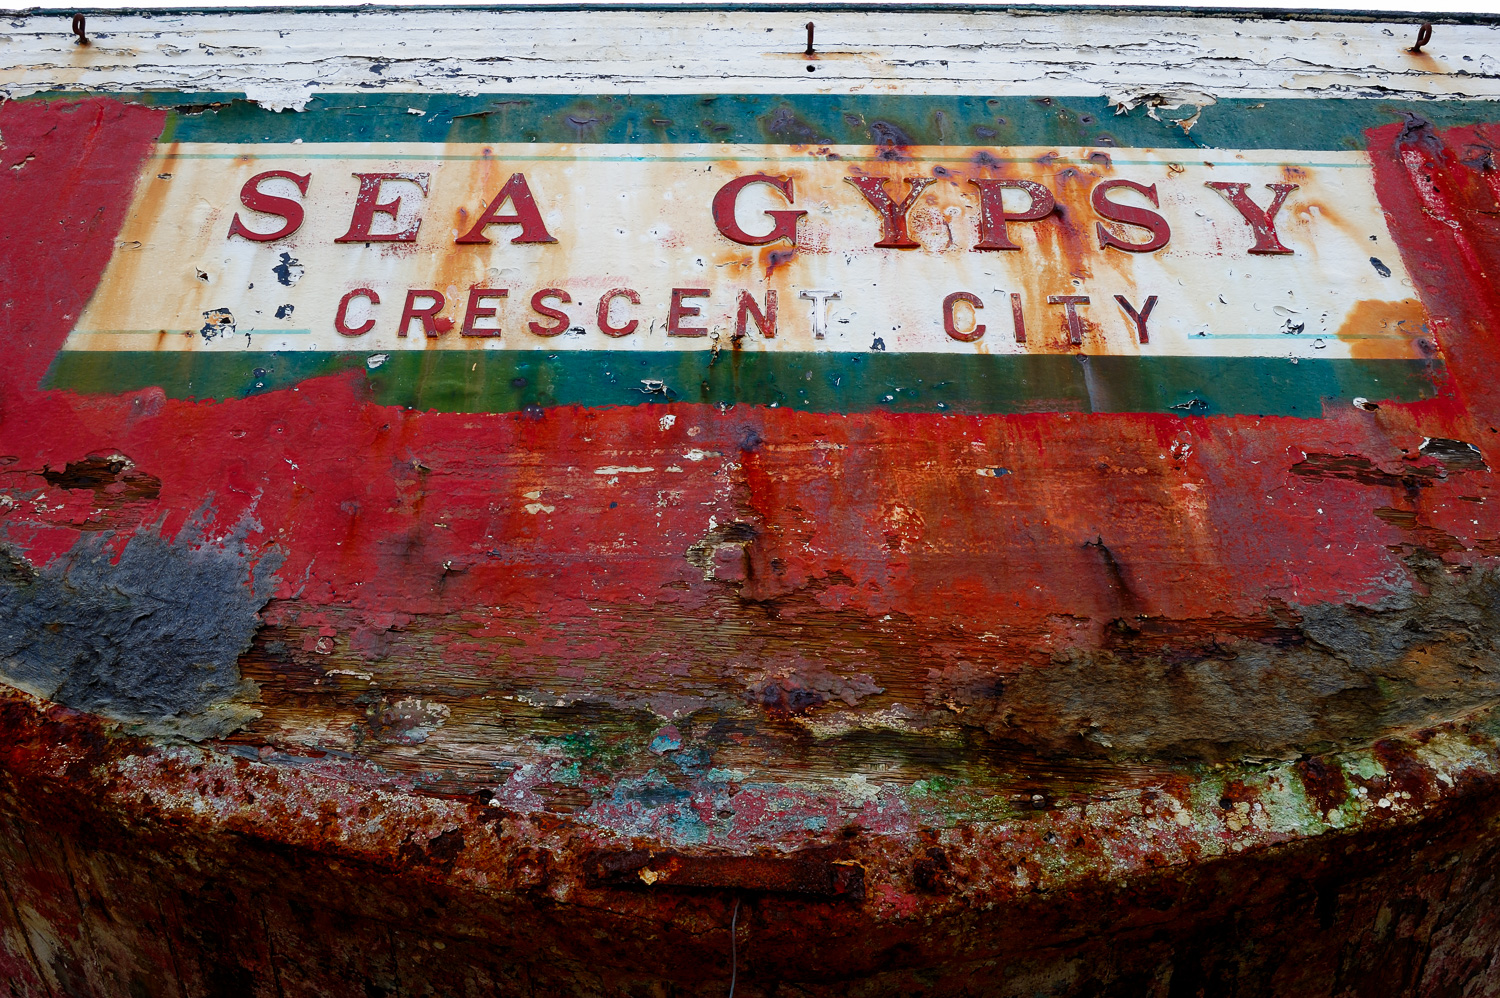 Dry Dock, Crescent City, Caifornia